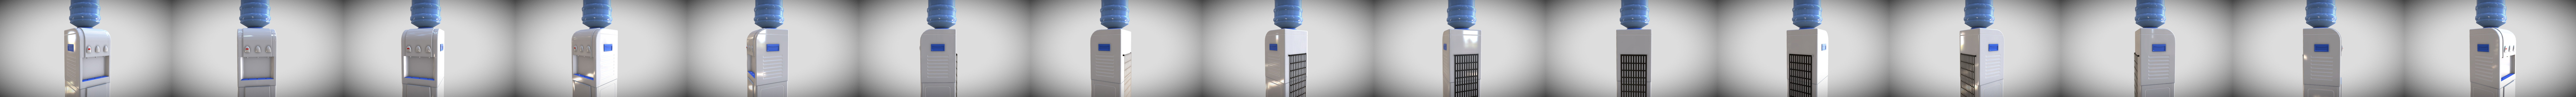 43,982 Water Dispenser Images, Stock Photos, 3D objects, & Vectors